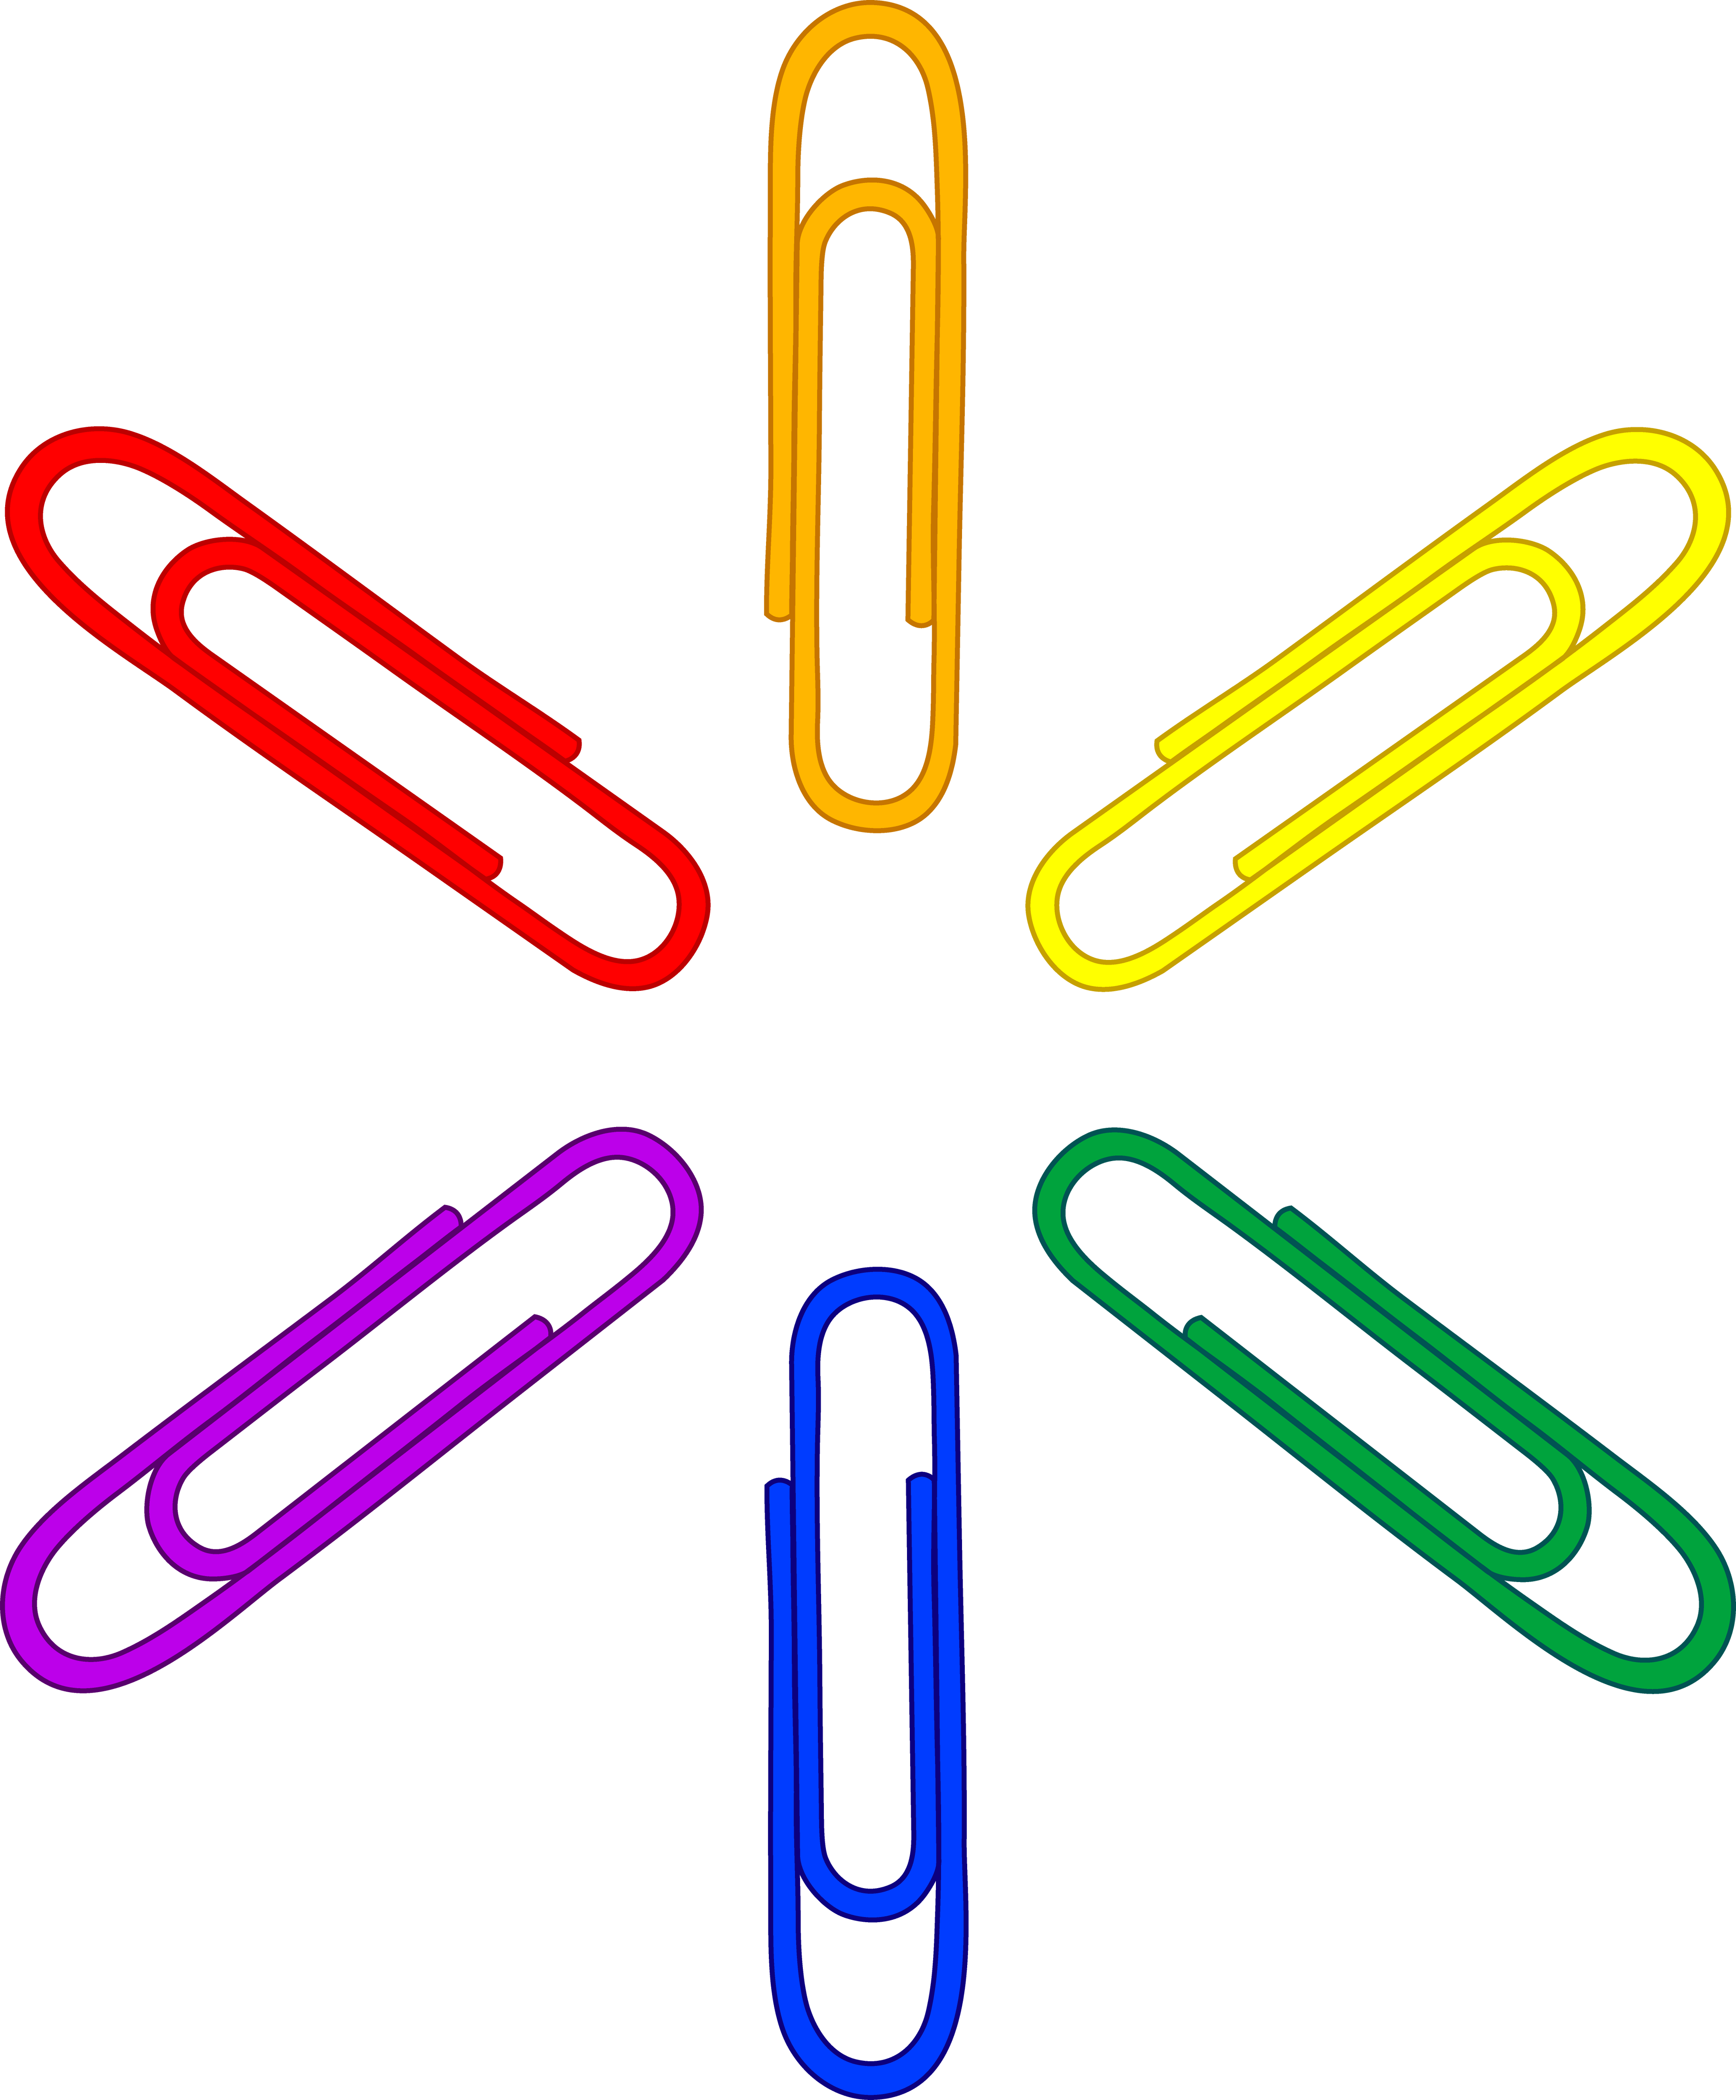 Paper Clip Clip Art | Clipart library - Free Clipart Images